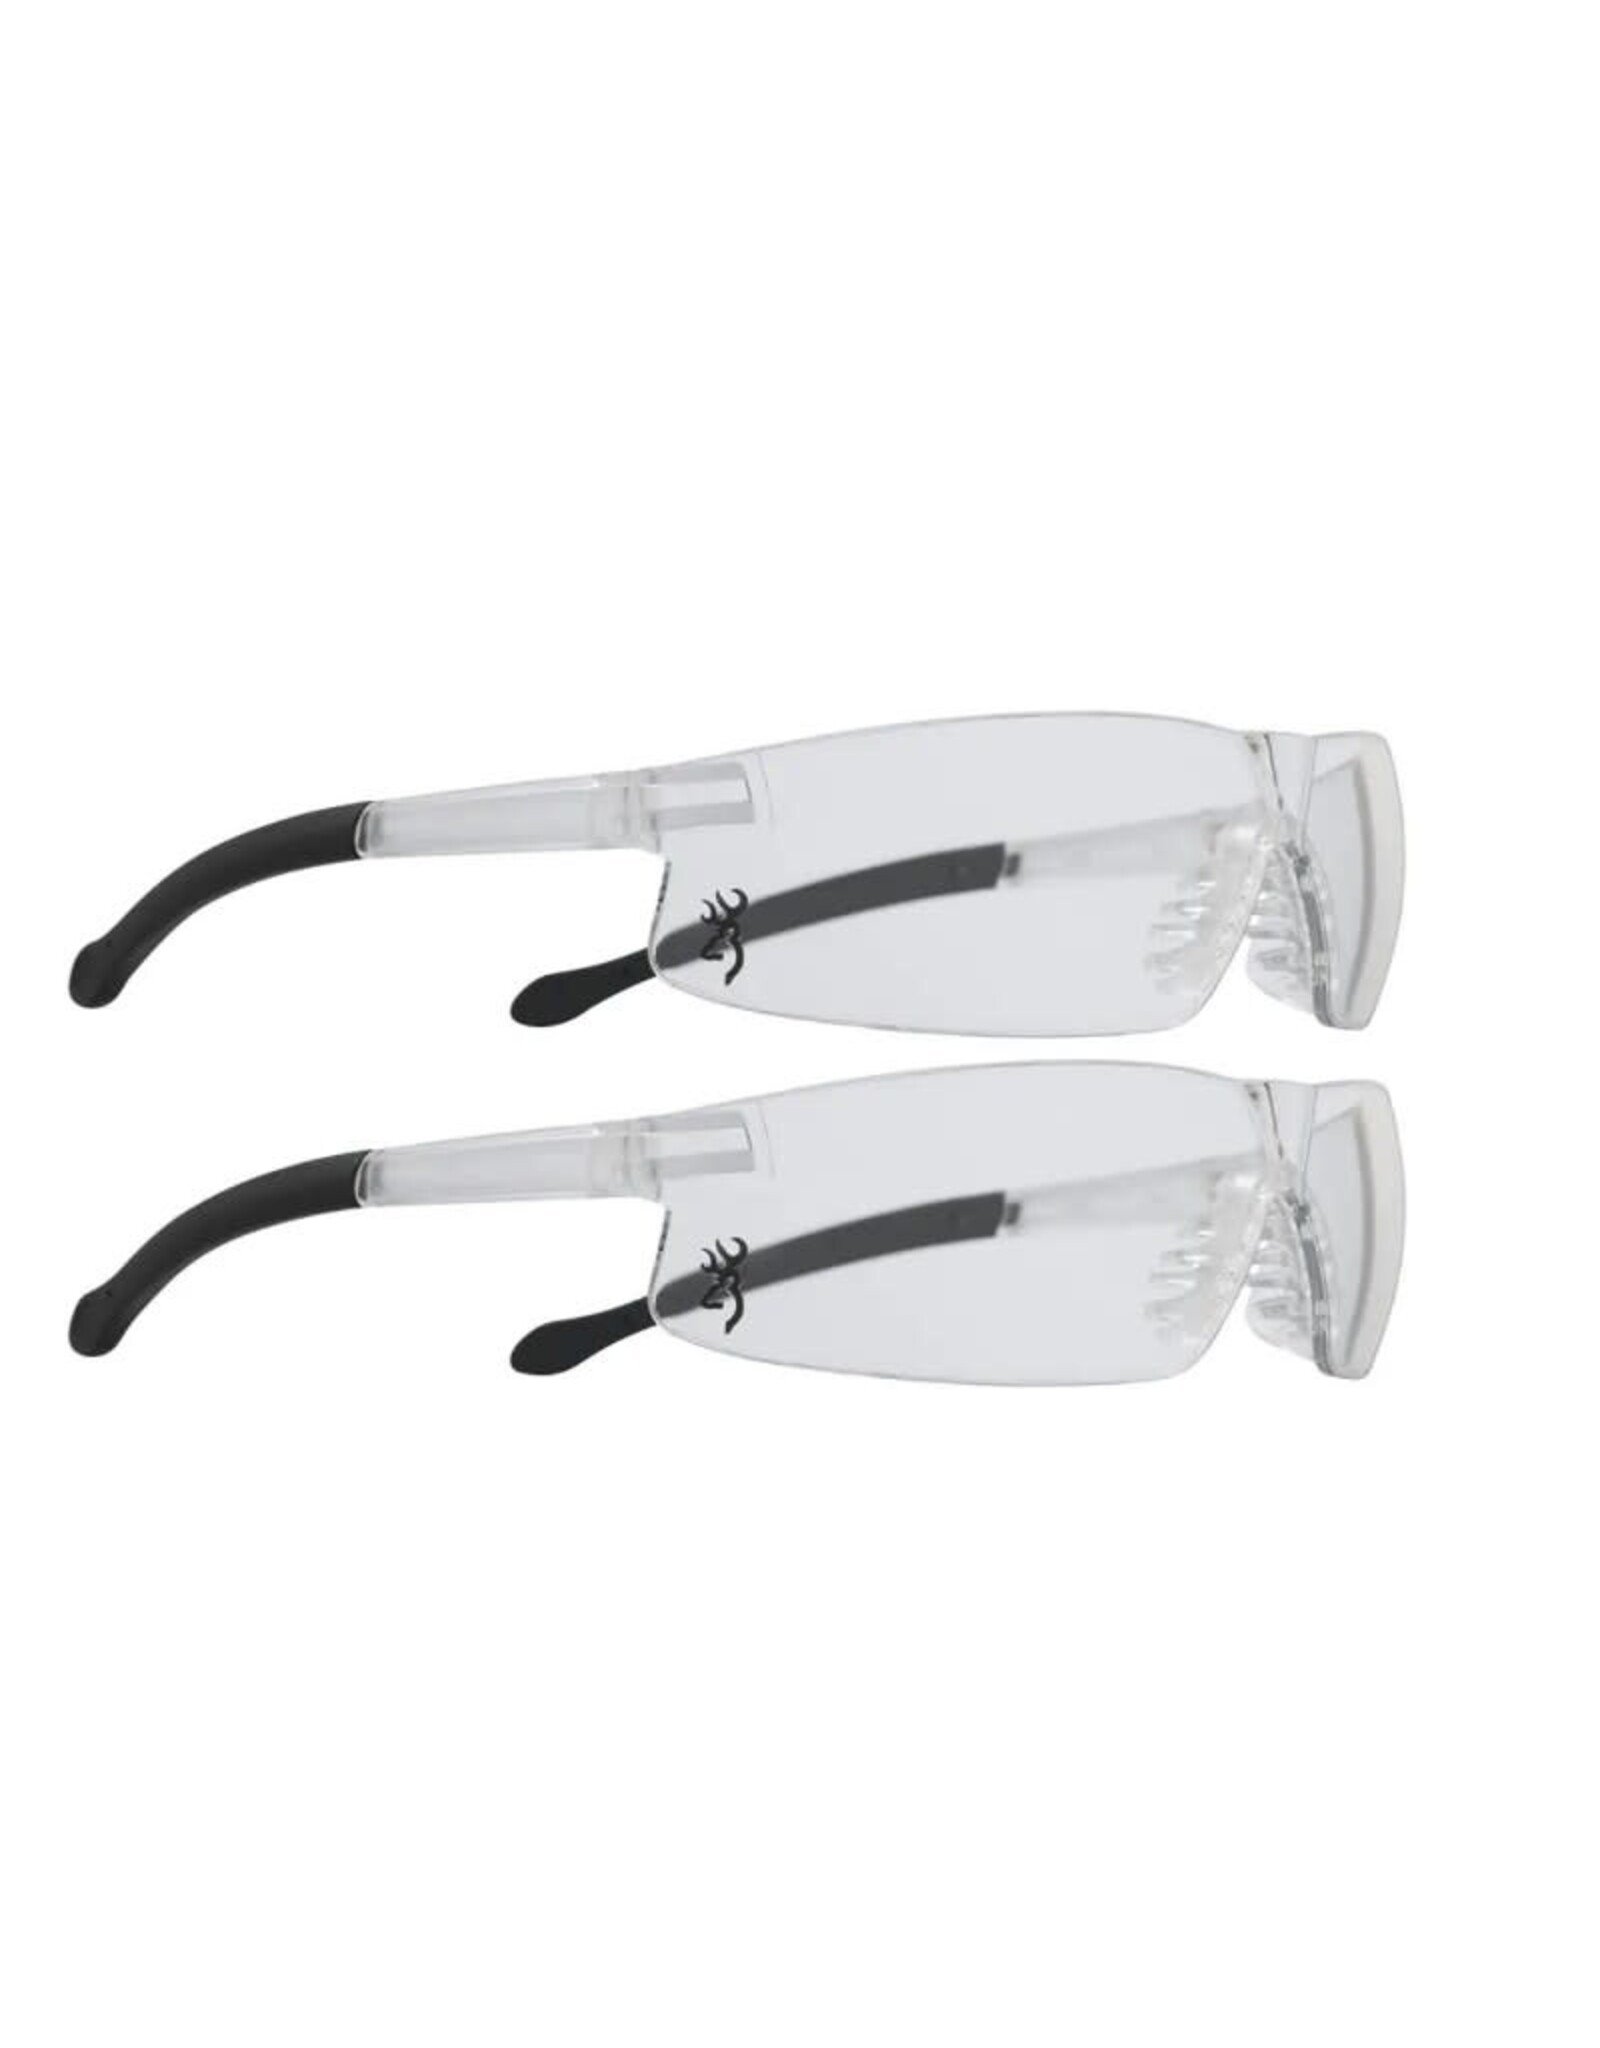 Browning Shooters Flex Glasses - Clear - 2 Count